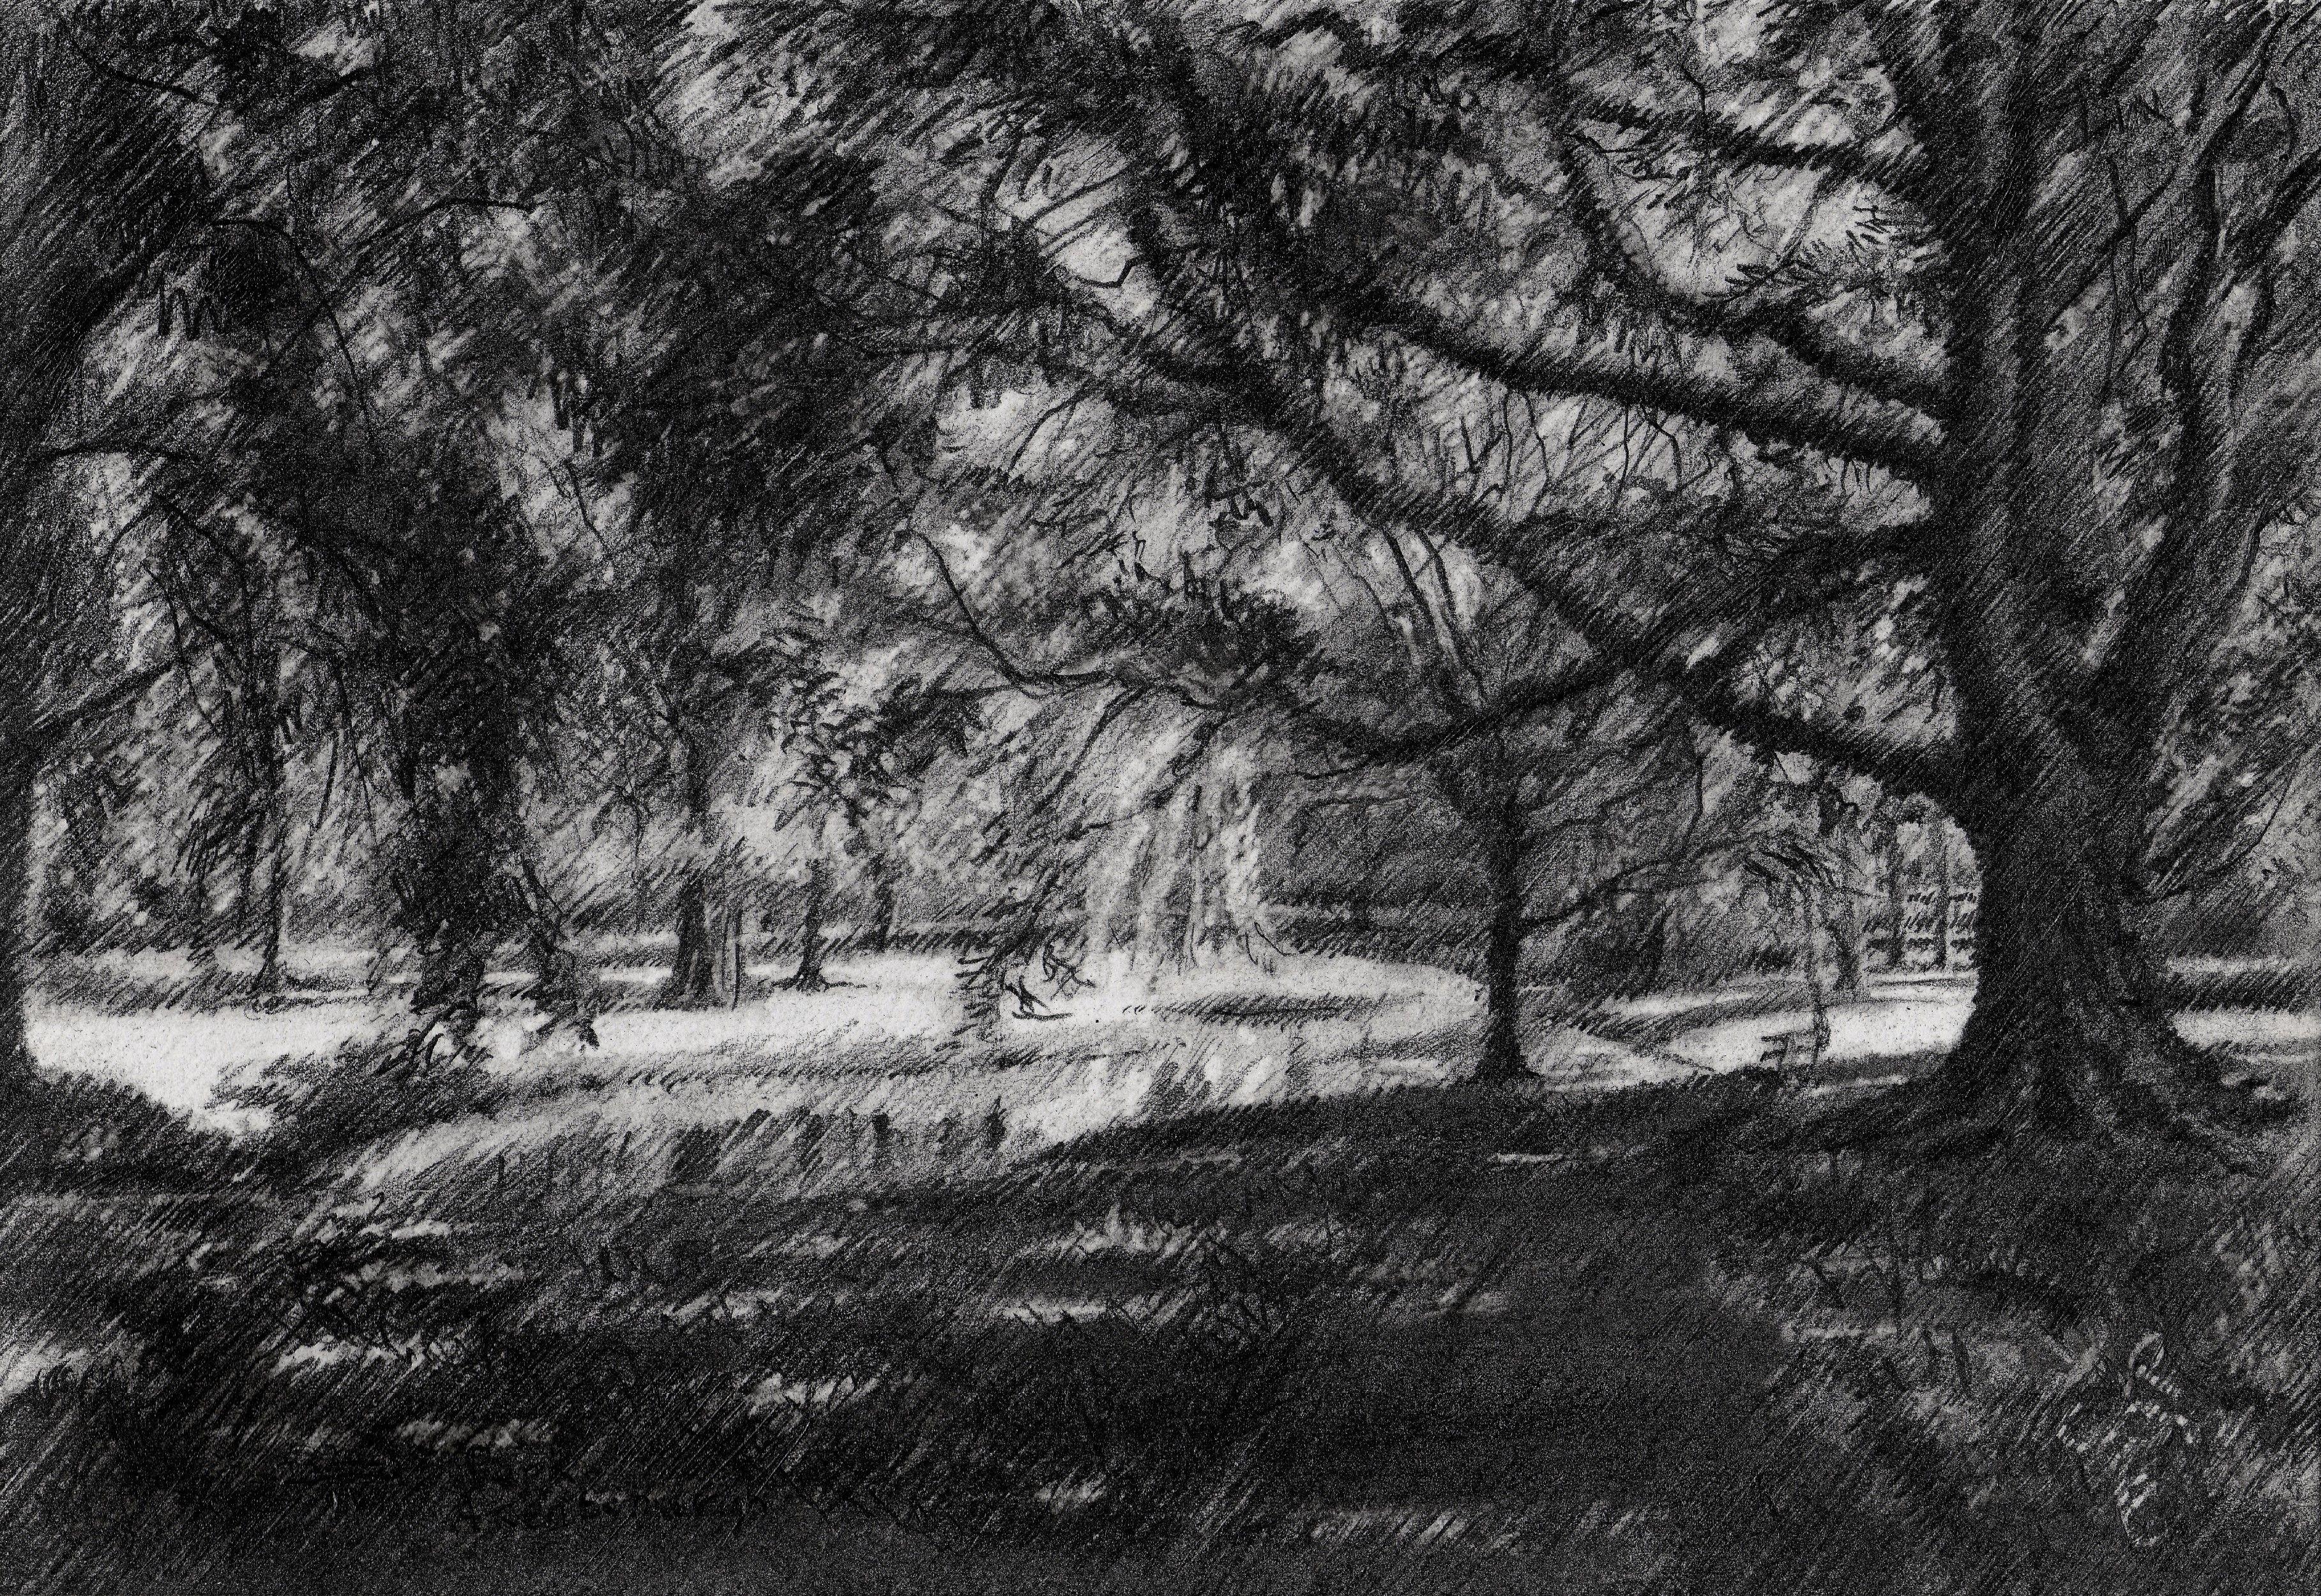 Park Arentsburgh â€“ 20-04-23, Drawing, Pencil/Colored Pencil on Paper - Art by Corne Akkers